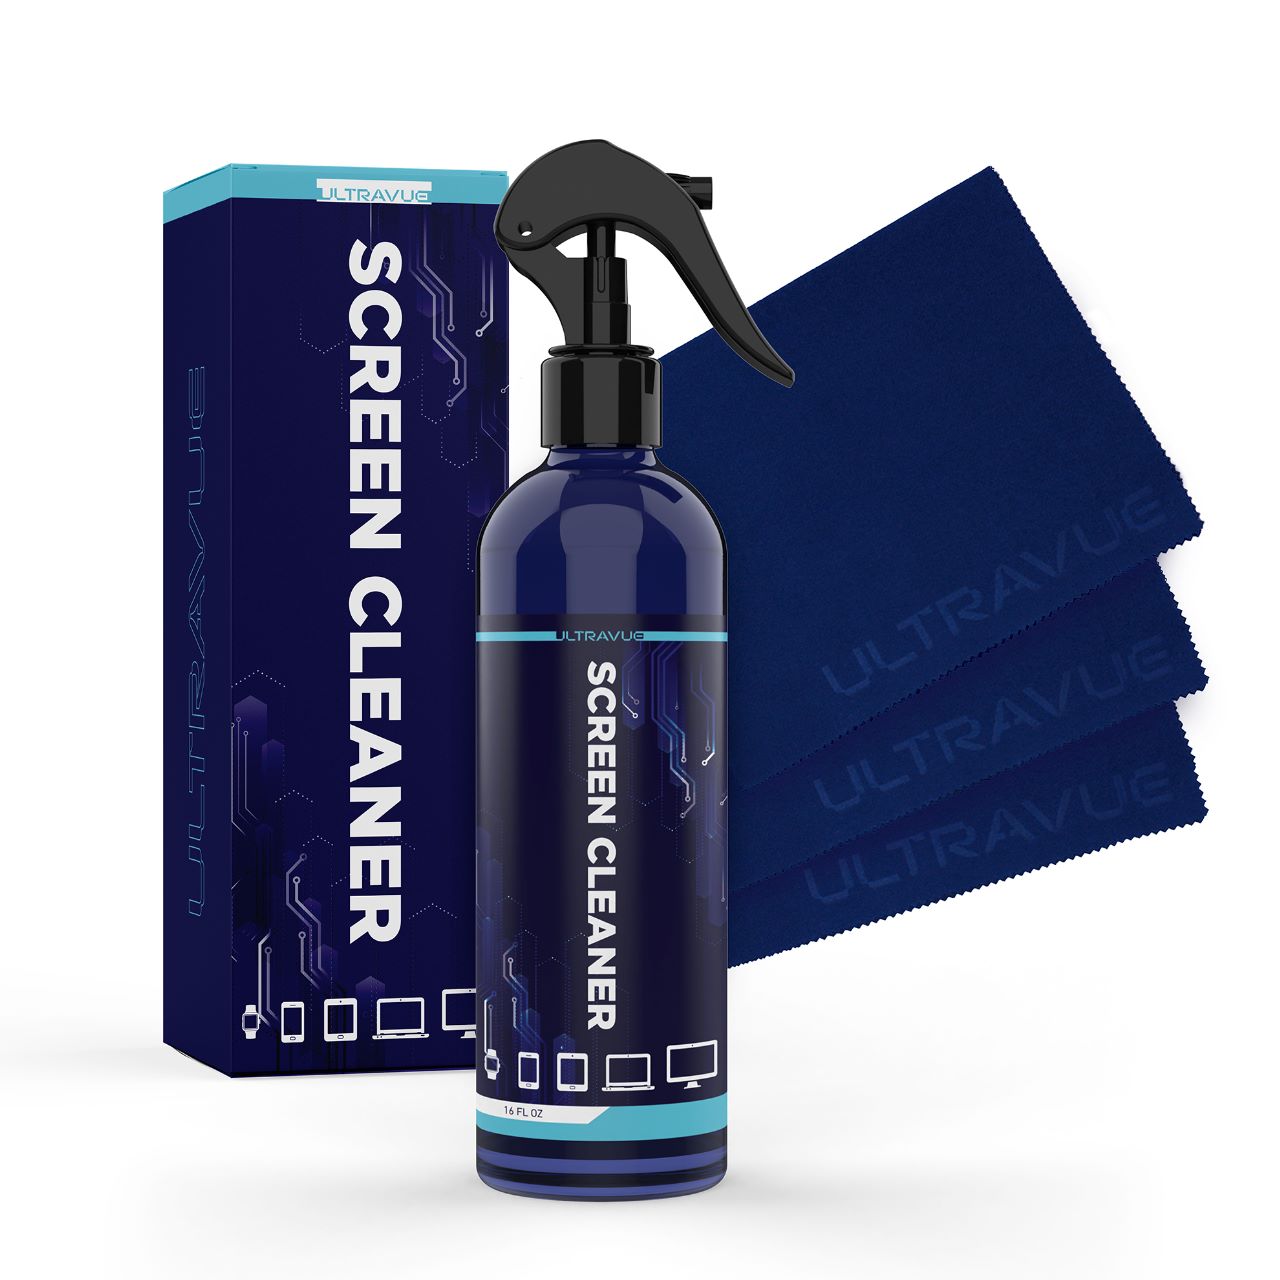 ULTRAVUE TV Screen Cleaner Kit- All in One Screen Cleaner - Ideal for Computer Monitor, LED, LCD, iPad, Laptops, Smartphones, & Touchscreens- 16oz Bottle & 3 Microfiber Cleaning Cloths